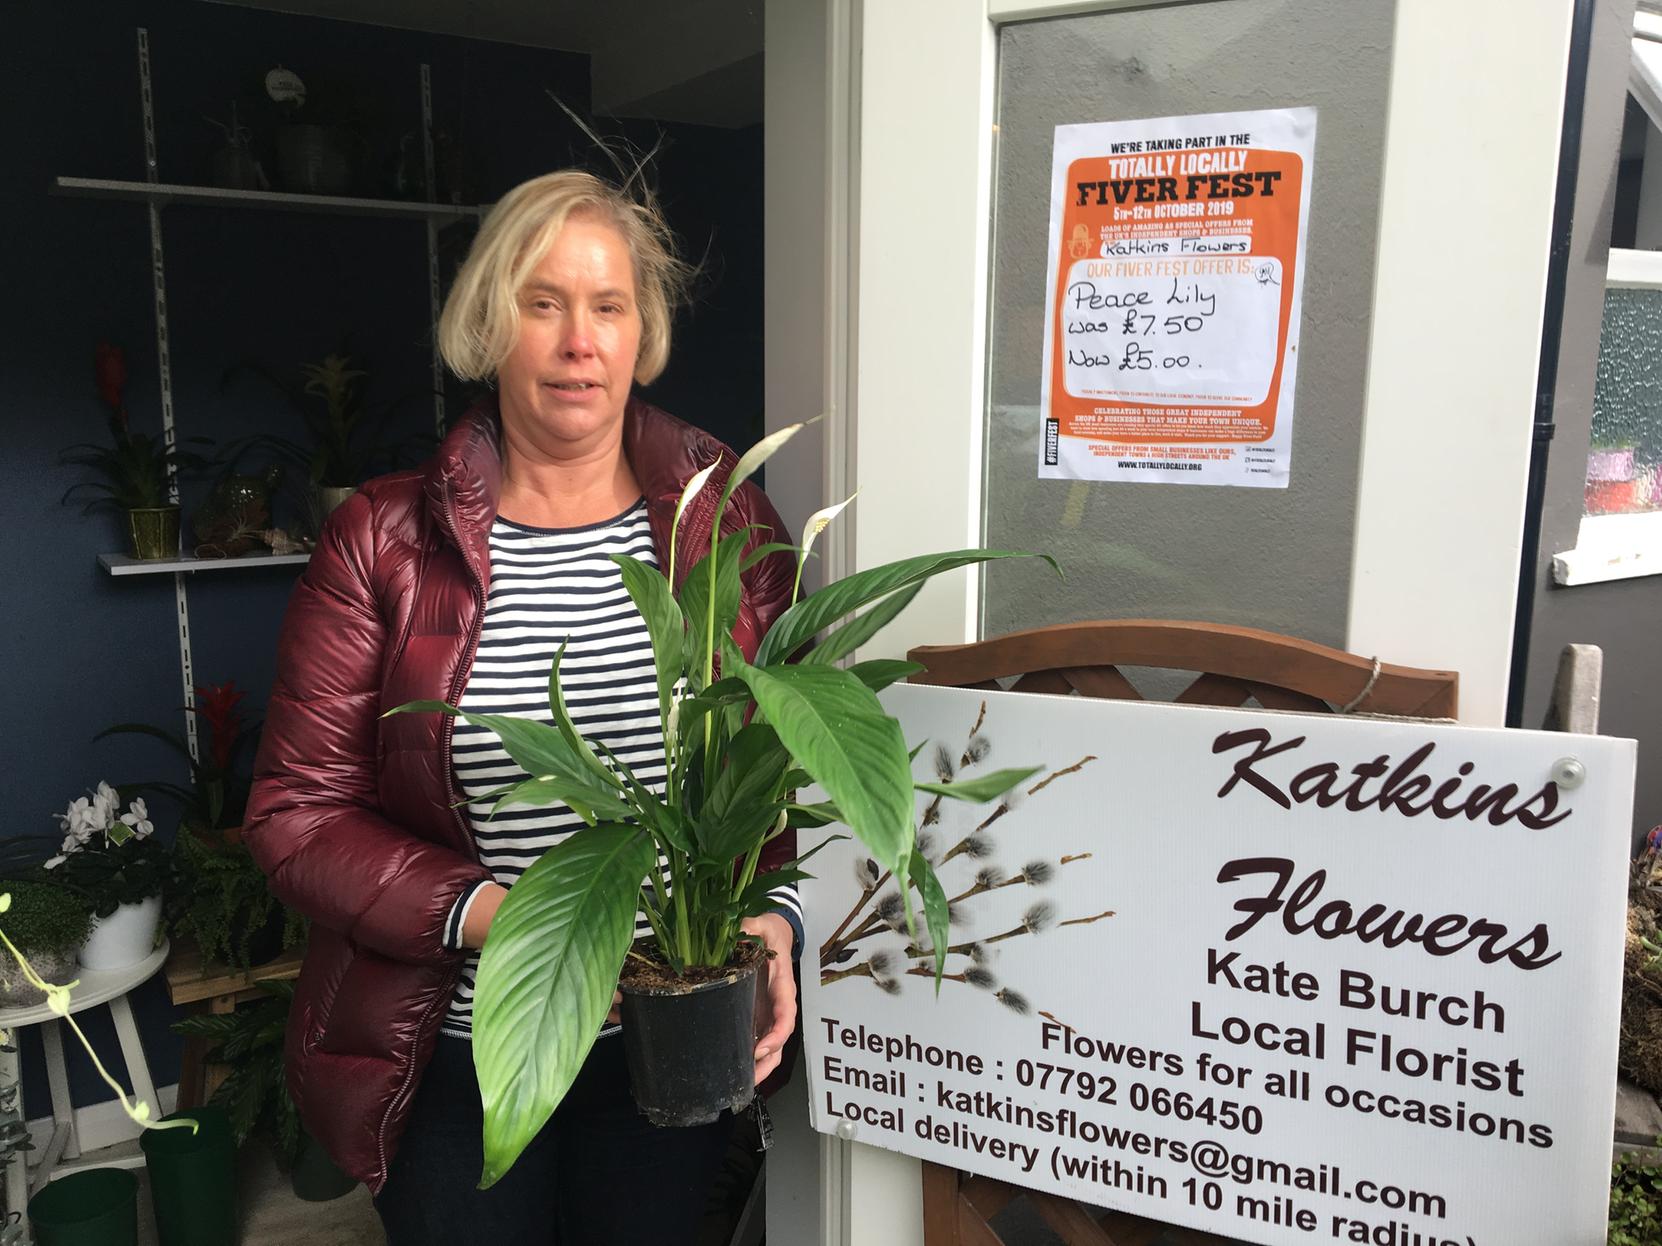 Hosting a special offer on peace lilies